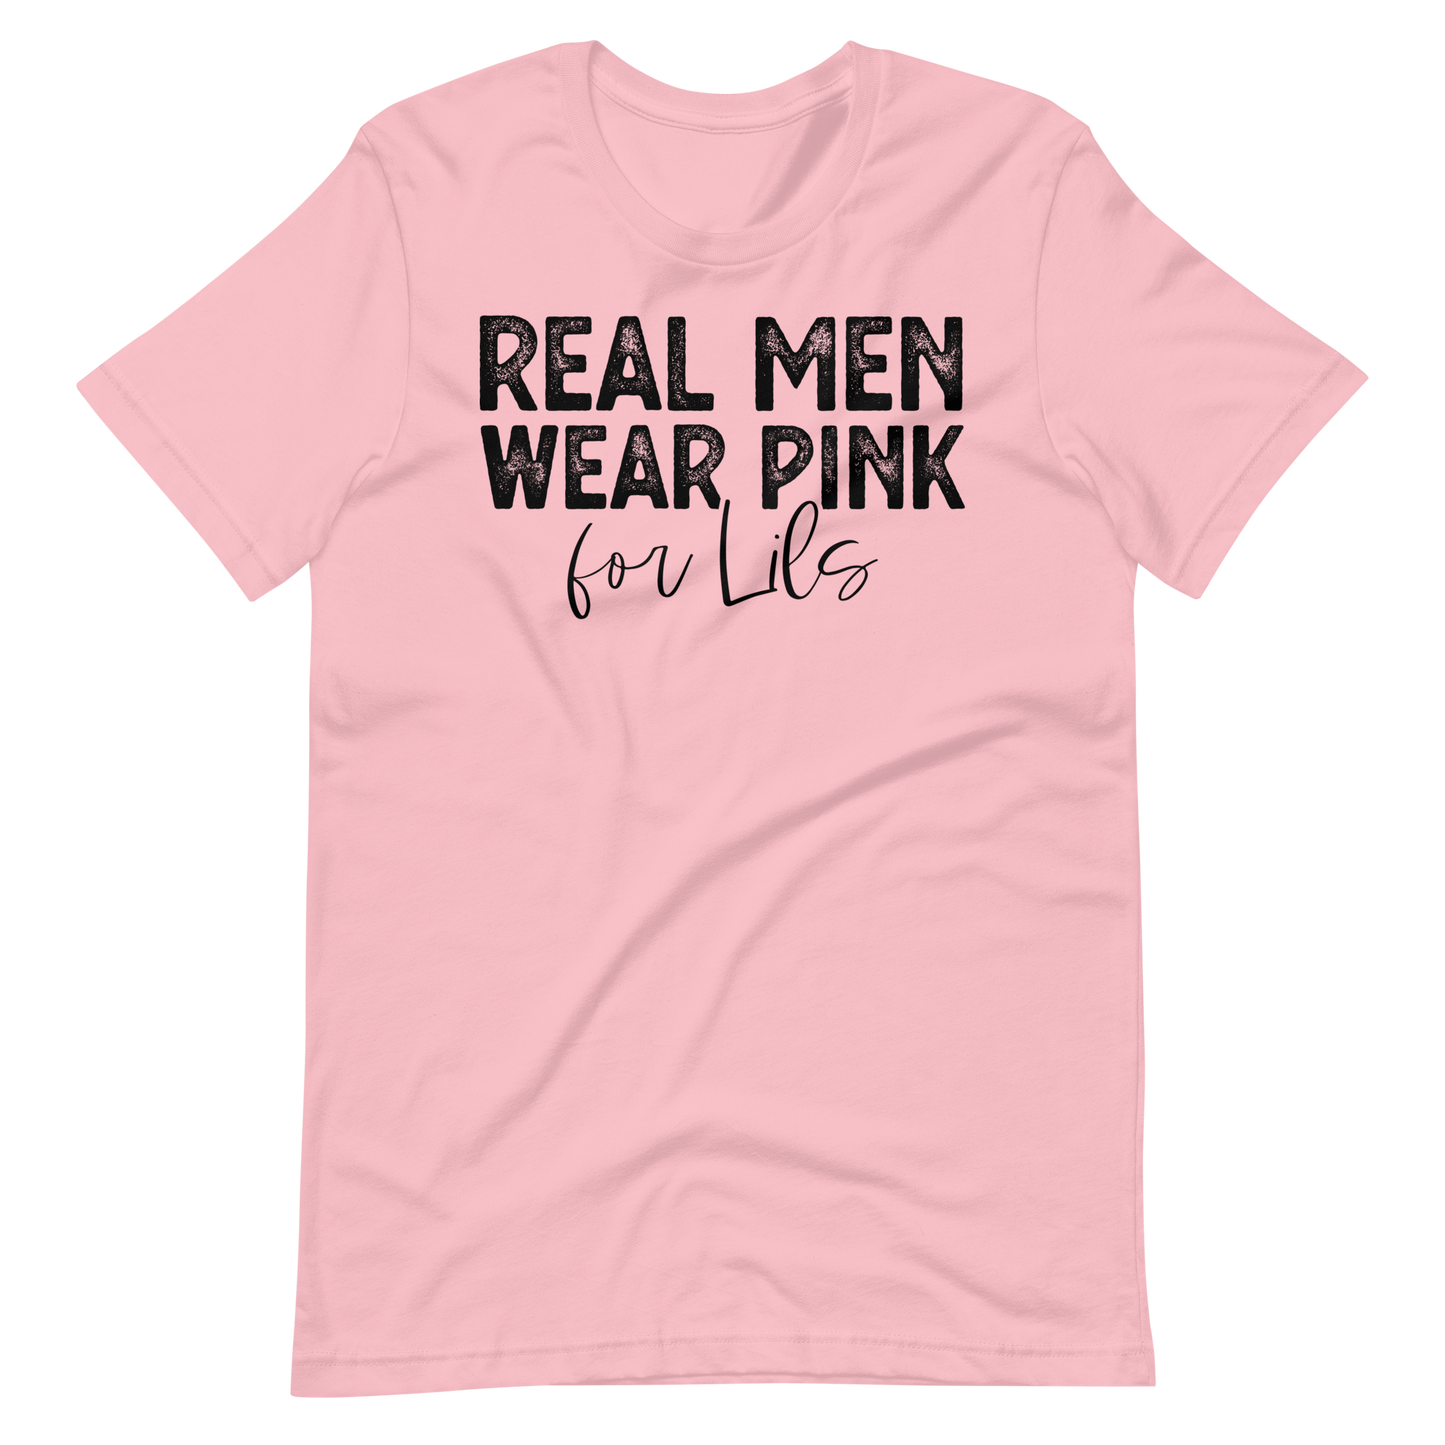 Real Men Wear Pink for Lils Tee